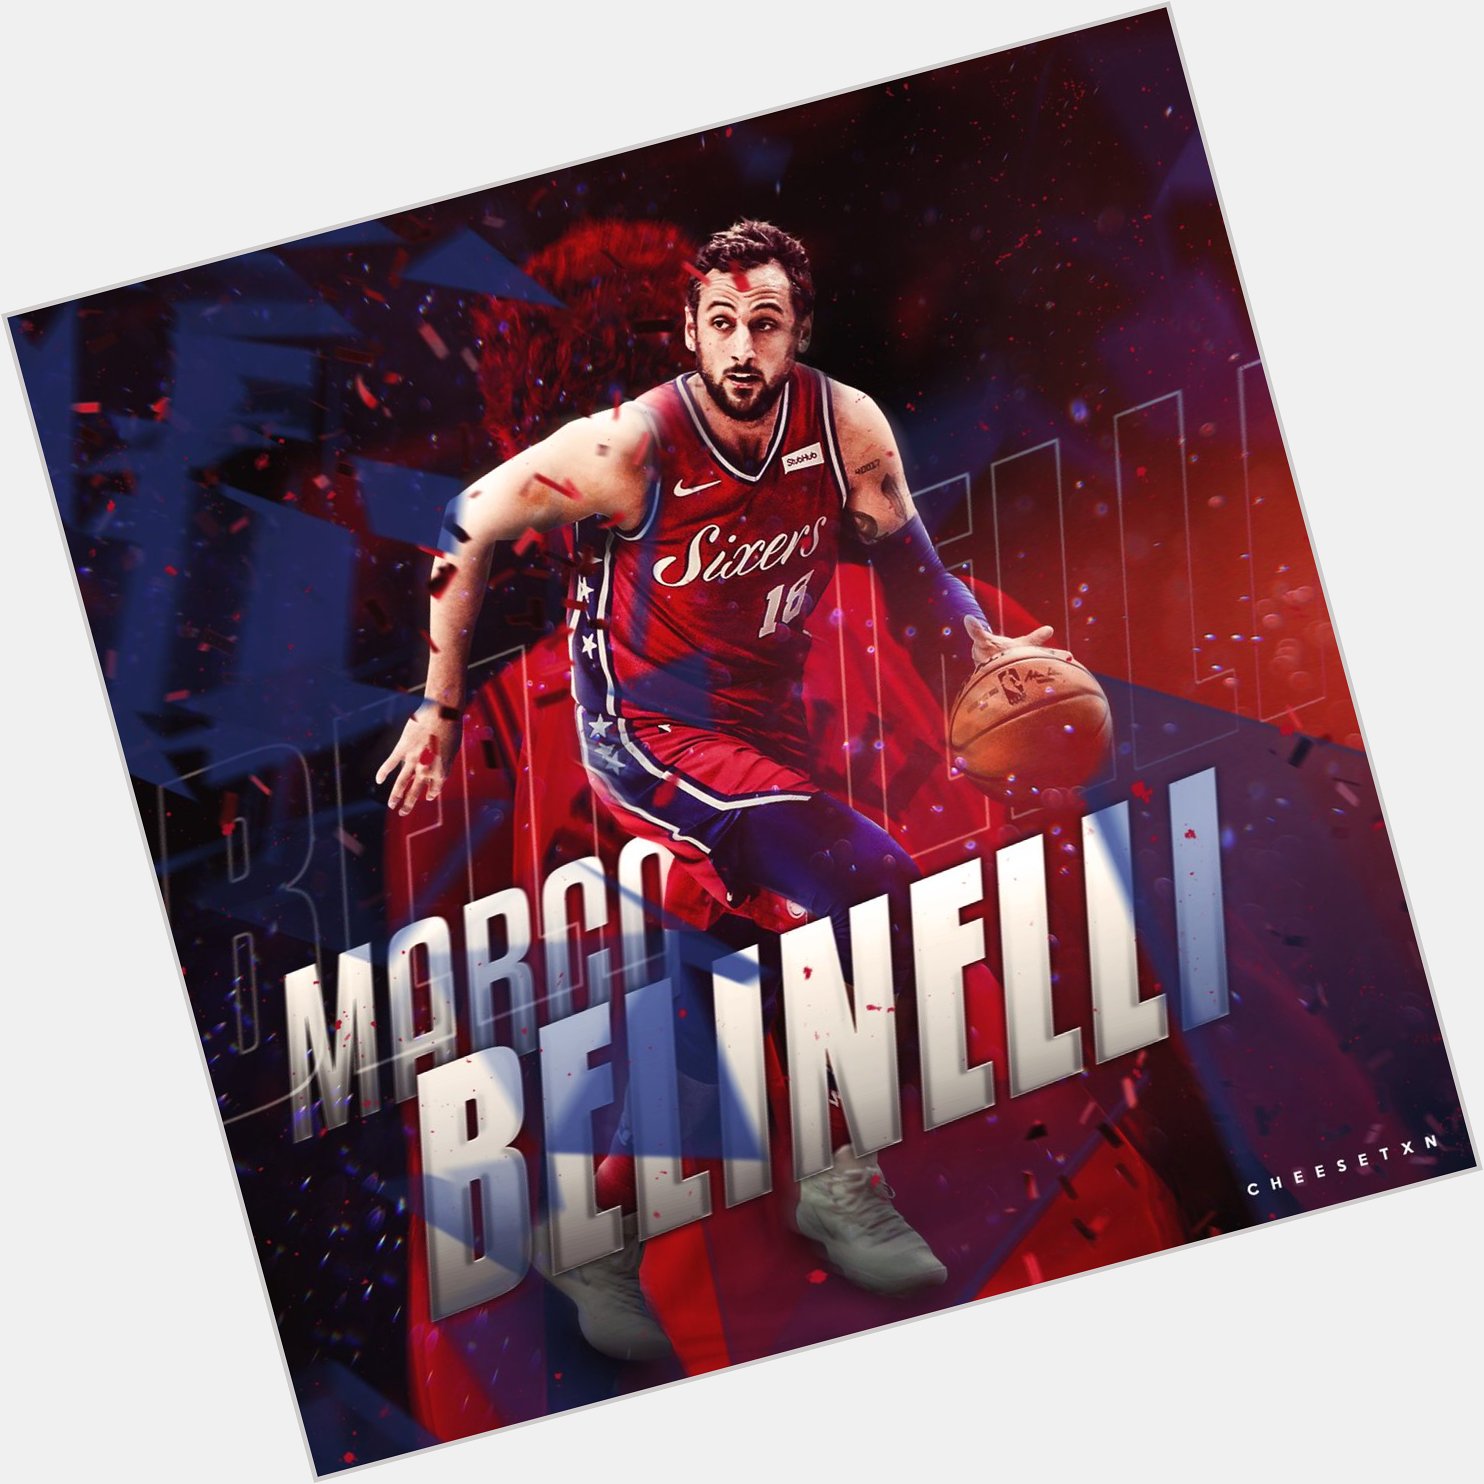 Marco Belinelli | | Happy birthday Marco, have a good one!
|   